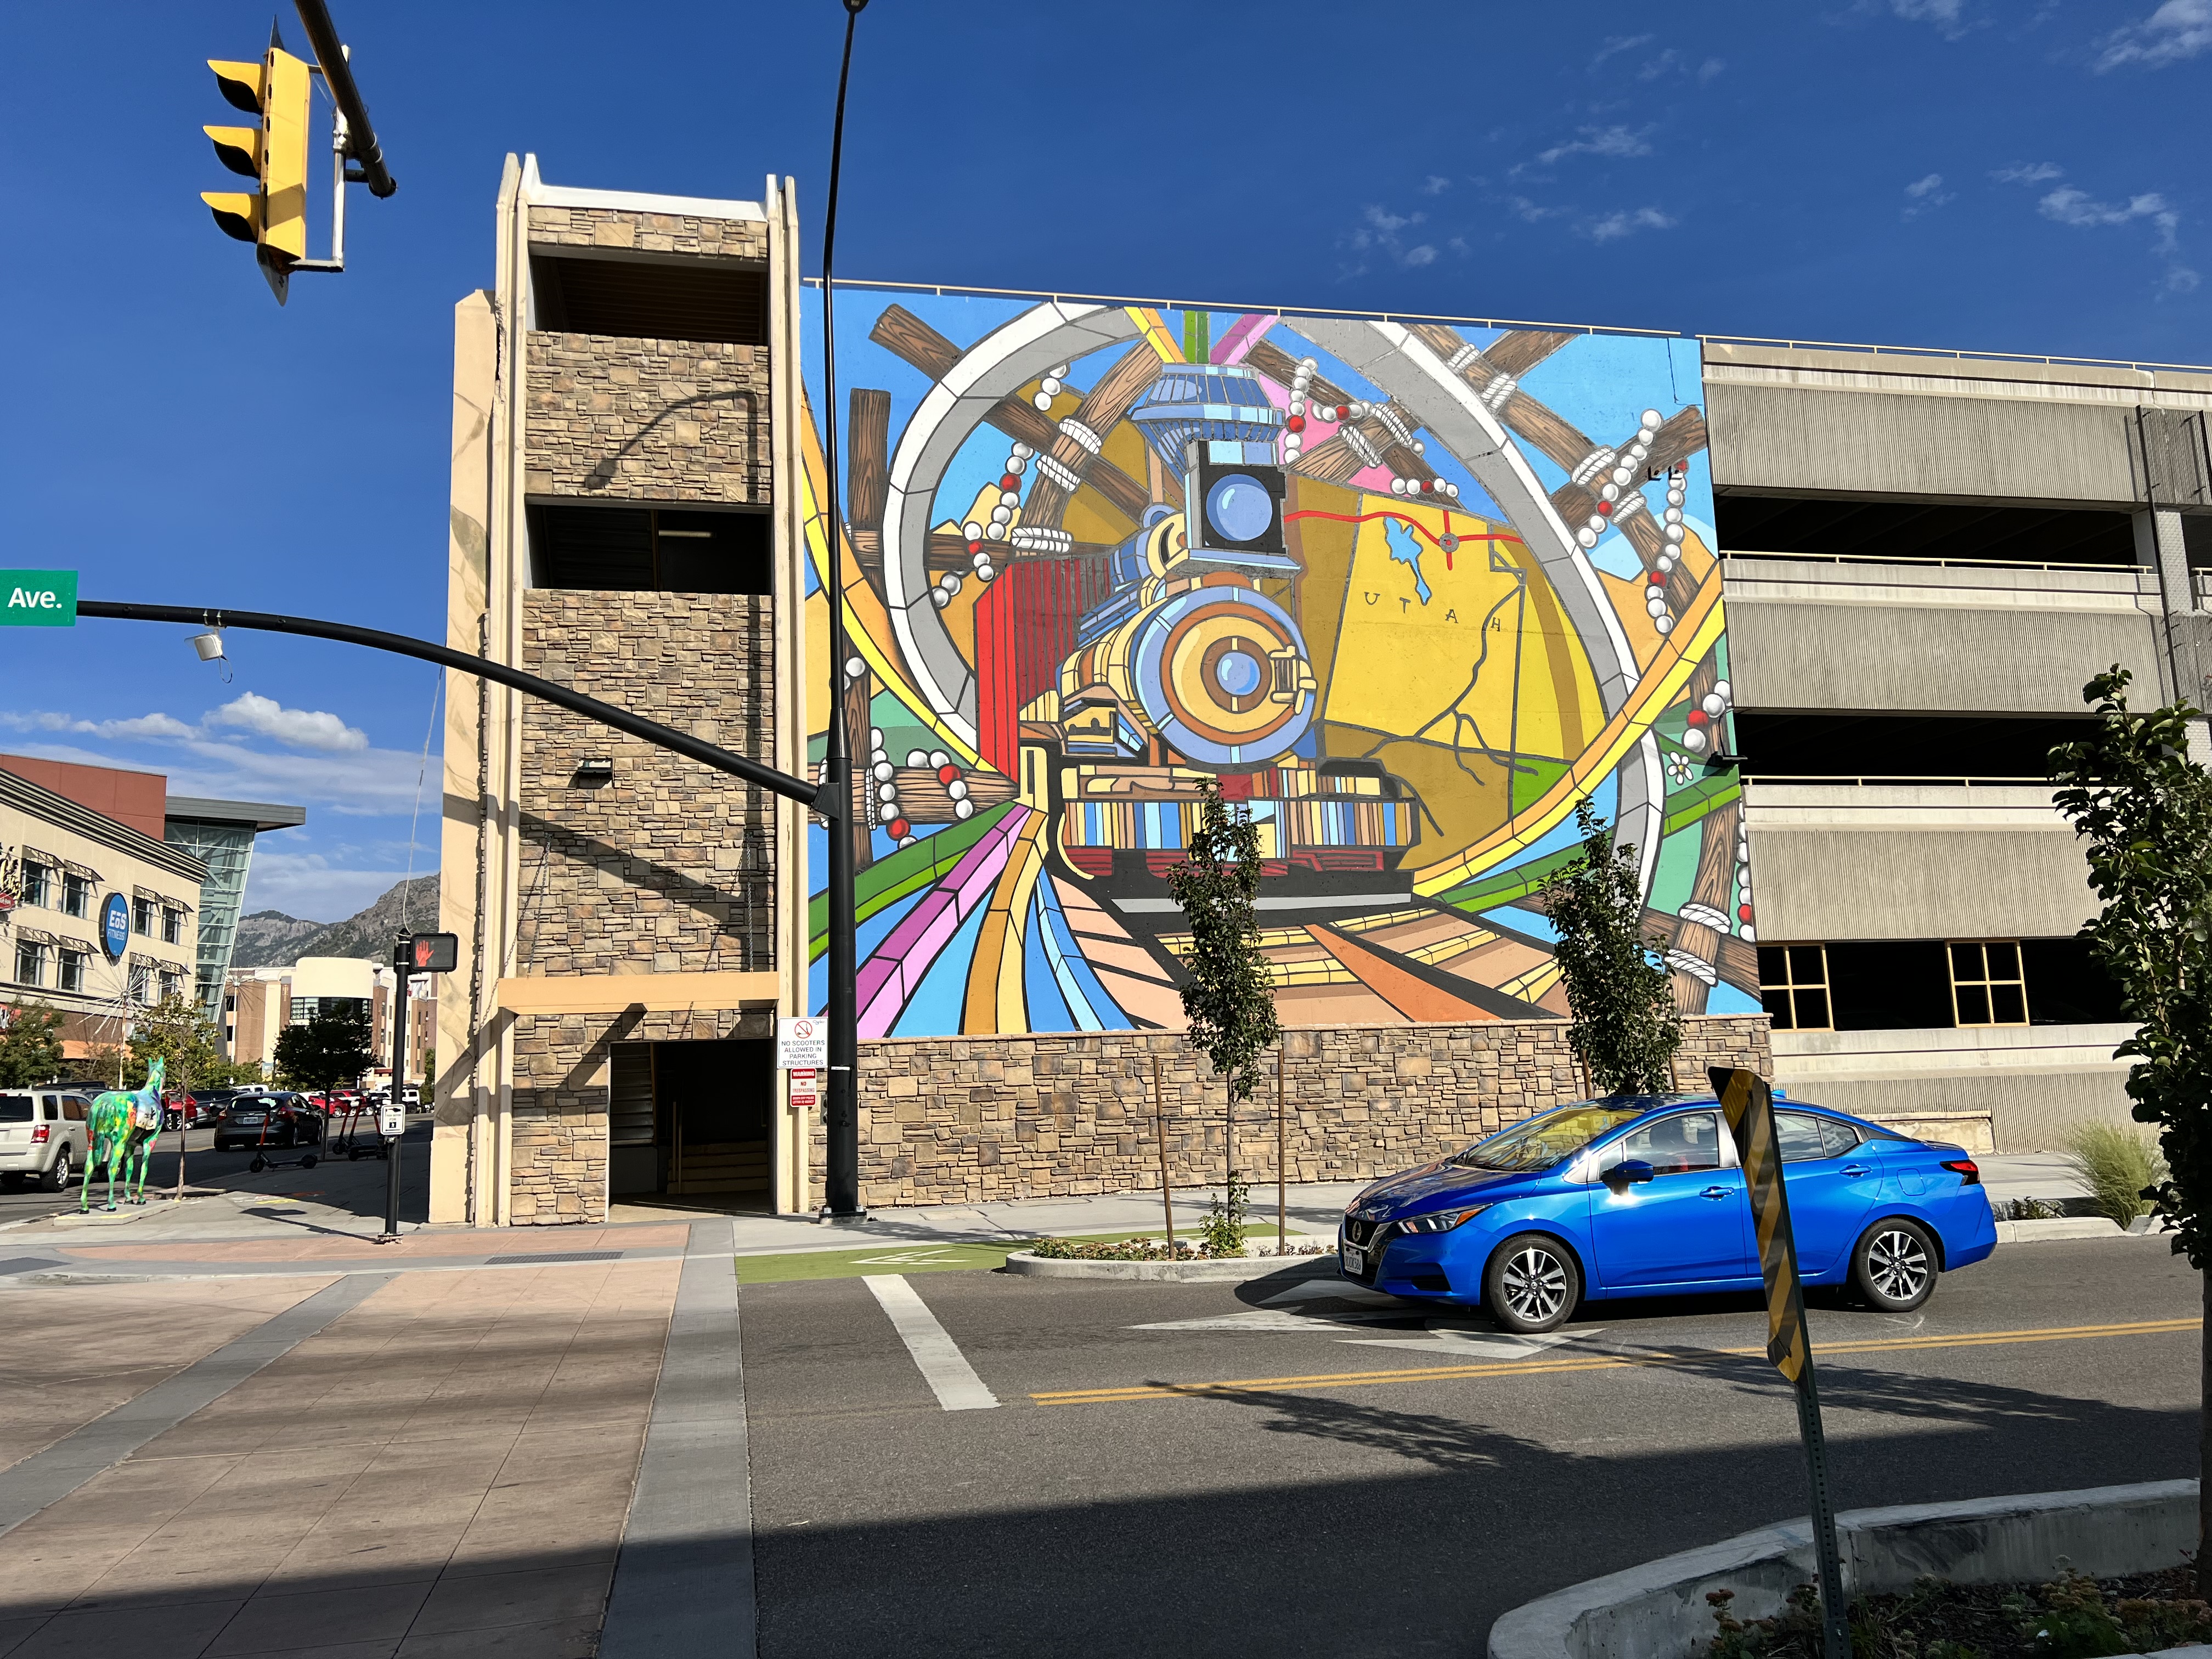 photo of a mural and car in the vibrant photographic style